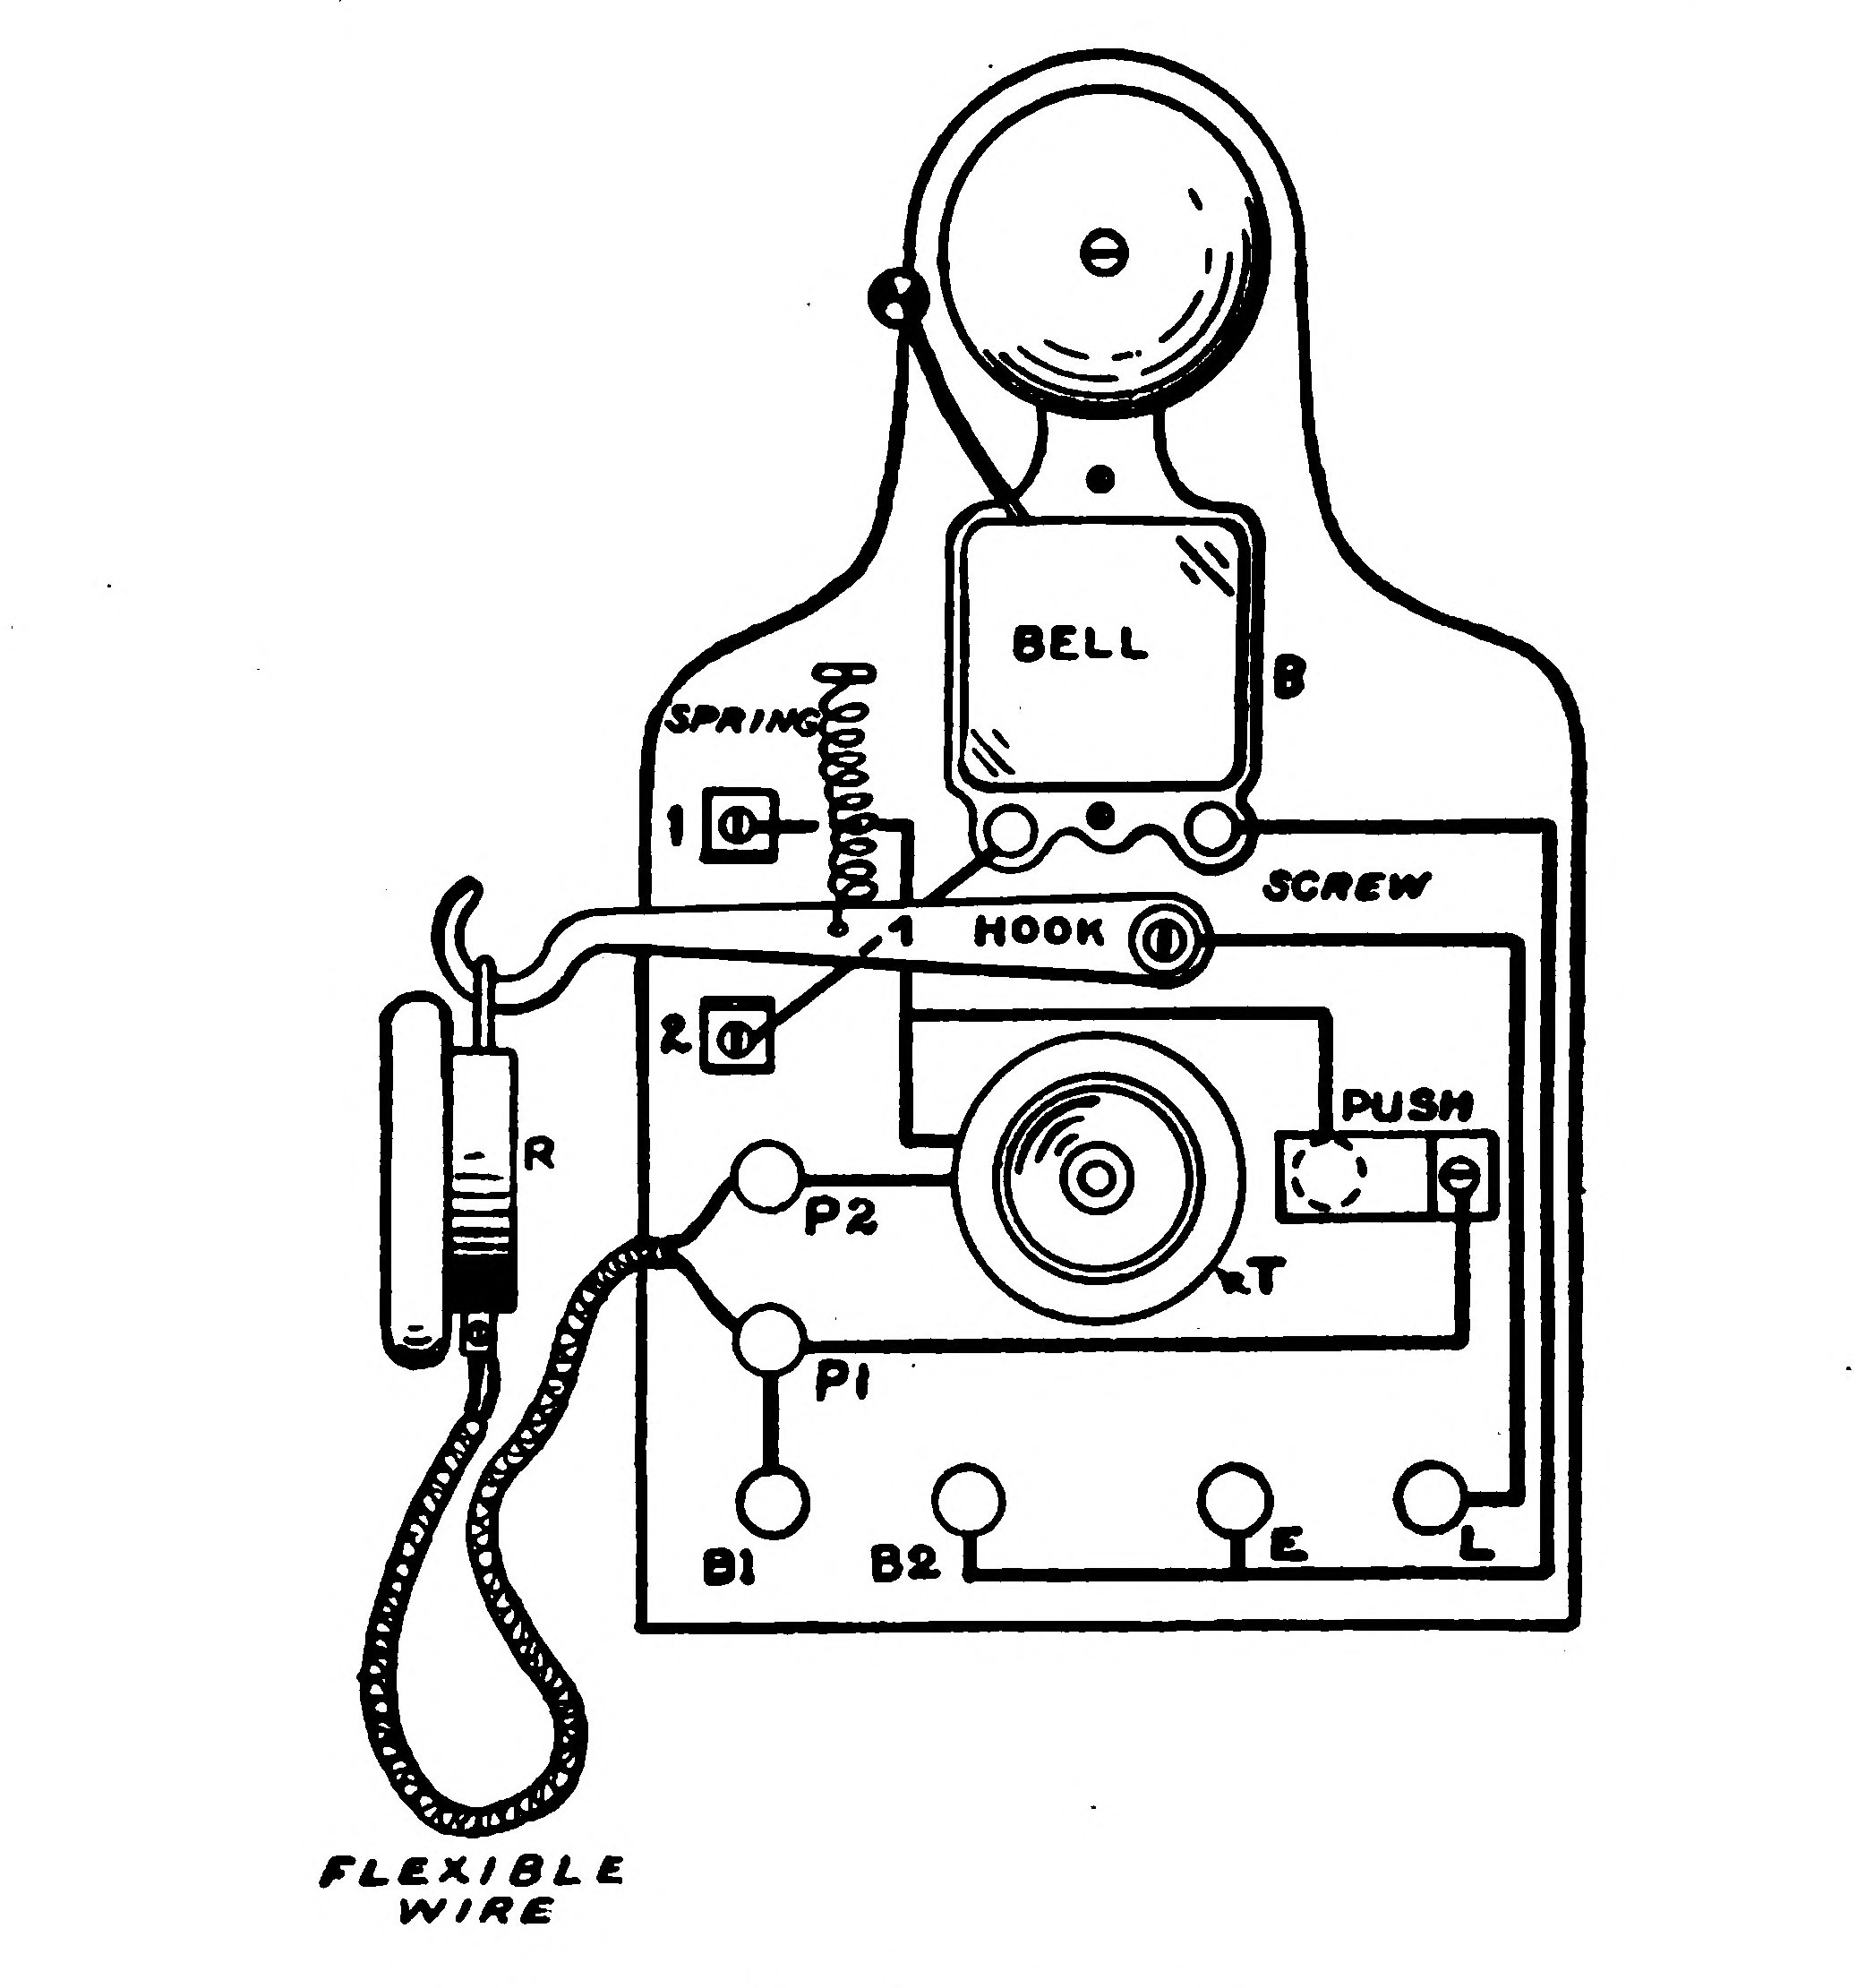 FIG. 94.—The Complete Telephone.